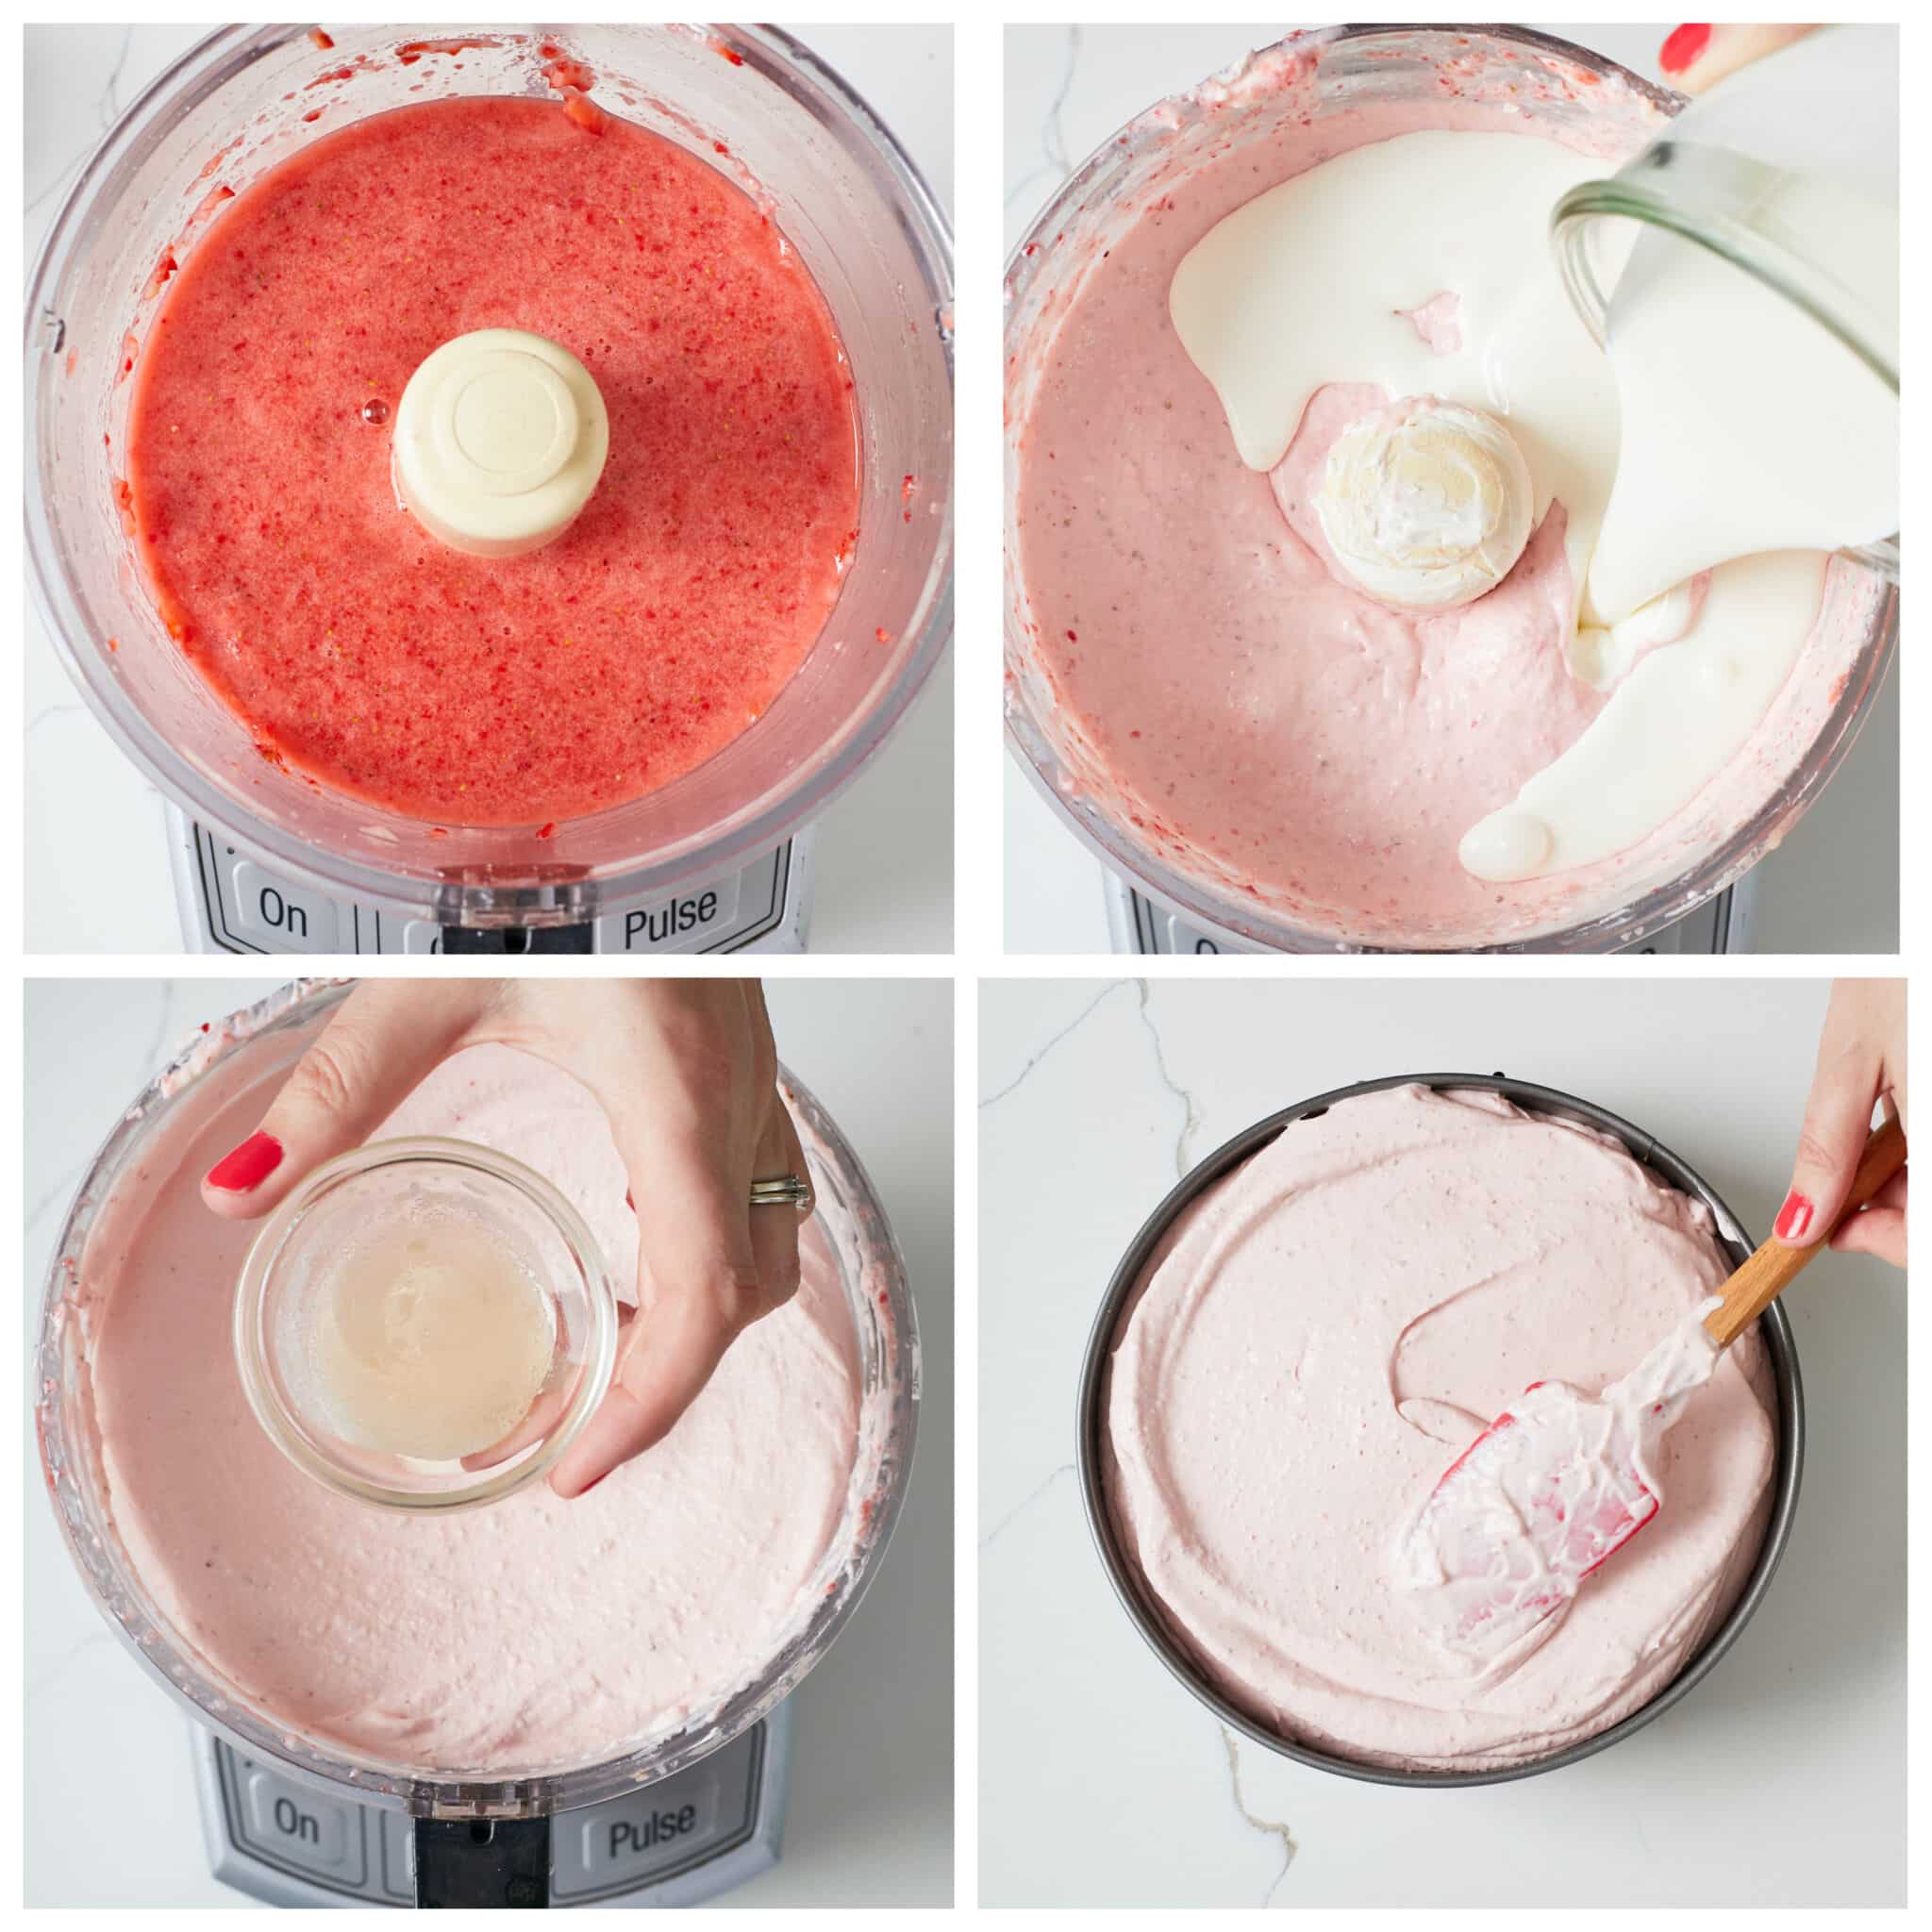 Step-by-step instructions on making the filling. Puree strawberries and sugar until lump free in a food processor. Add in the cream cheese and blend until smooth. While the machine is running, pour in the cream and the cooled liquid gelatin and continue blending until thickened. 